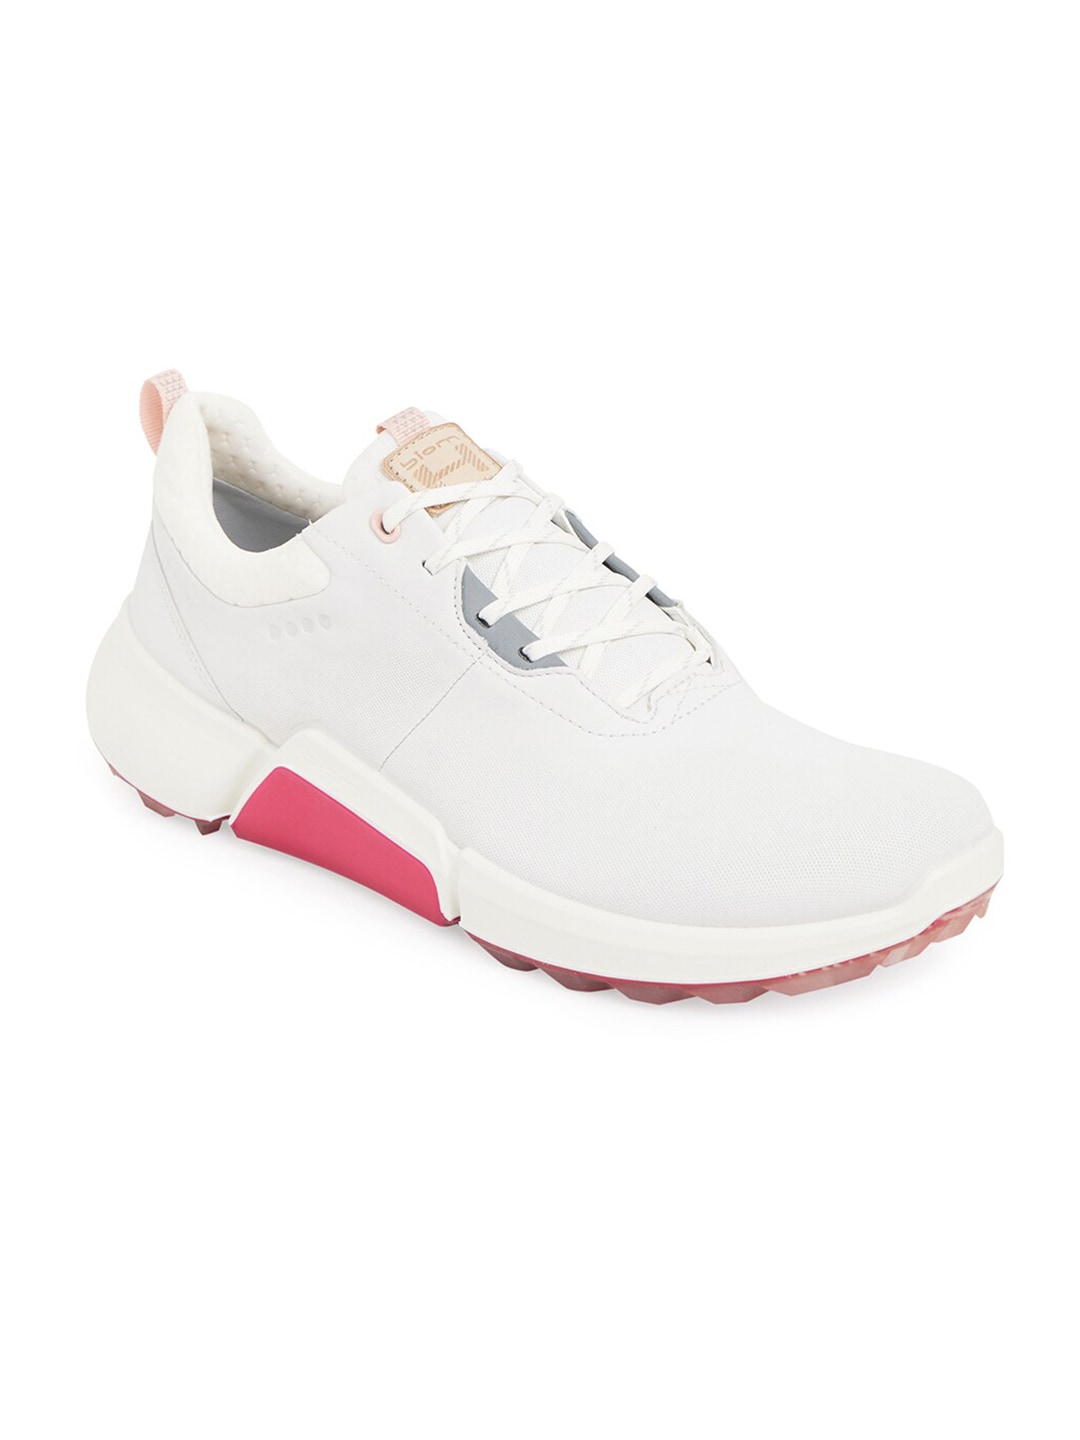 ECCO Women White Hybrid Performance Leather Golf Non-Marking Shoes Price in India